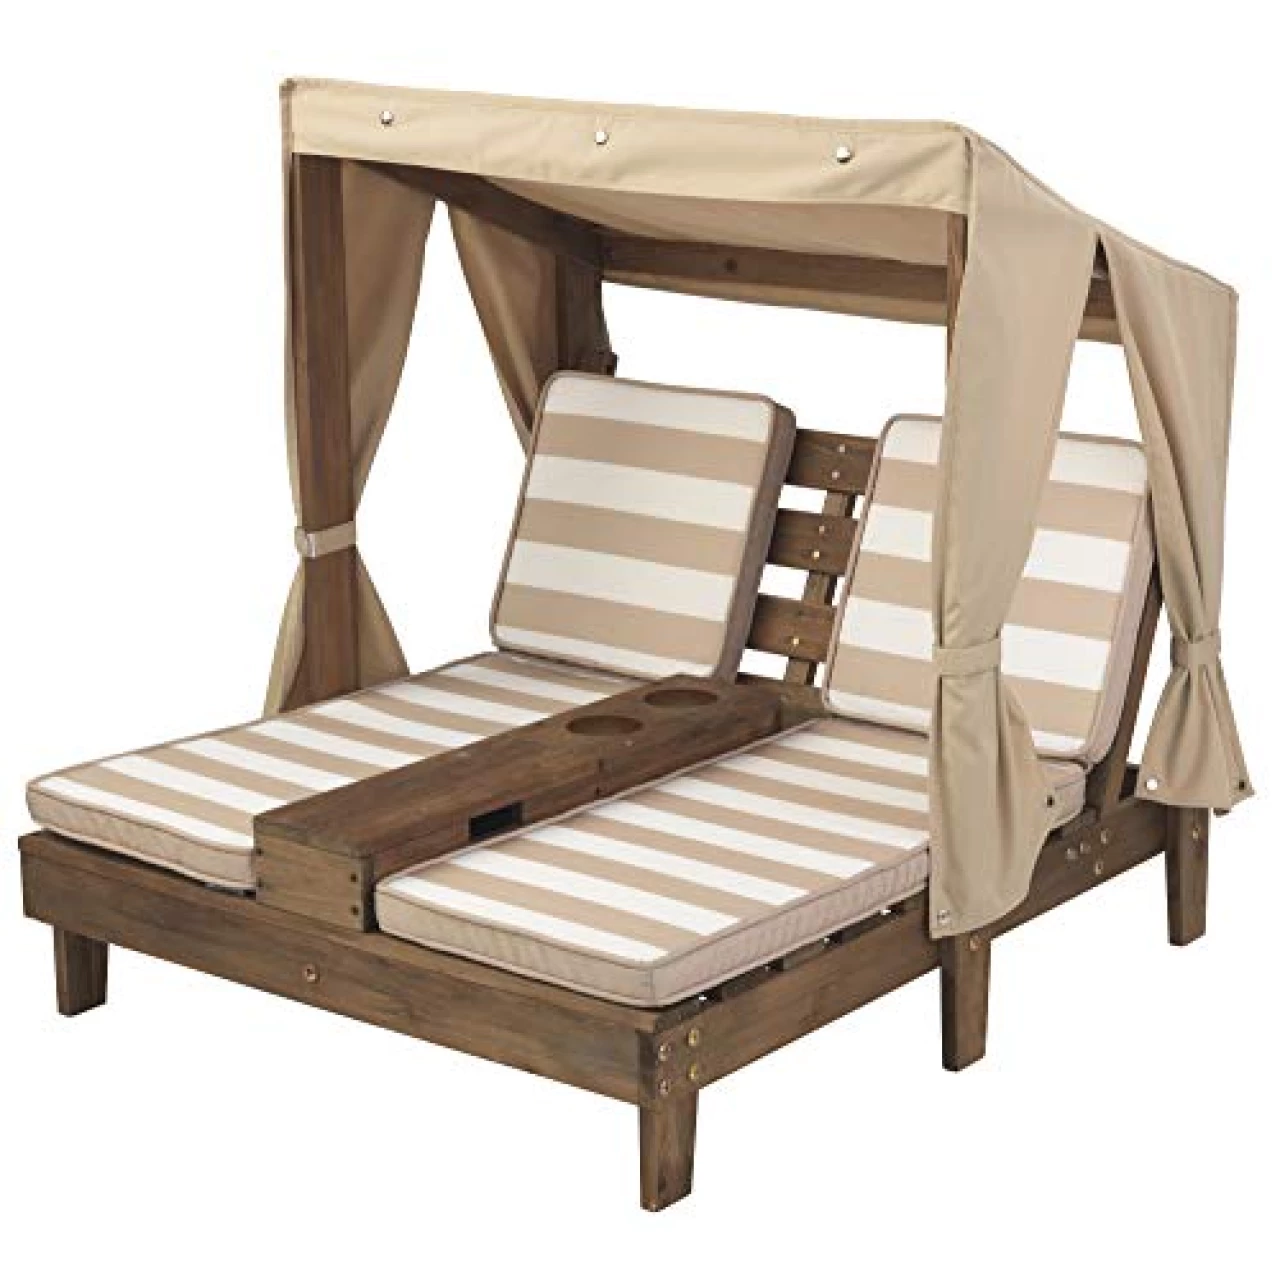 KidKraft Wooden Outdoor Double Chaise Lounge with Cup Holders, Patio Furniture for Kids or Pets, Espresso with Oatmeal and White Striped Fabric